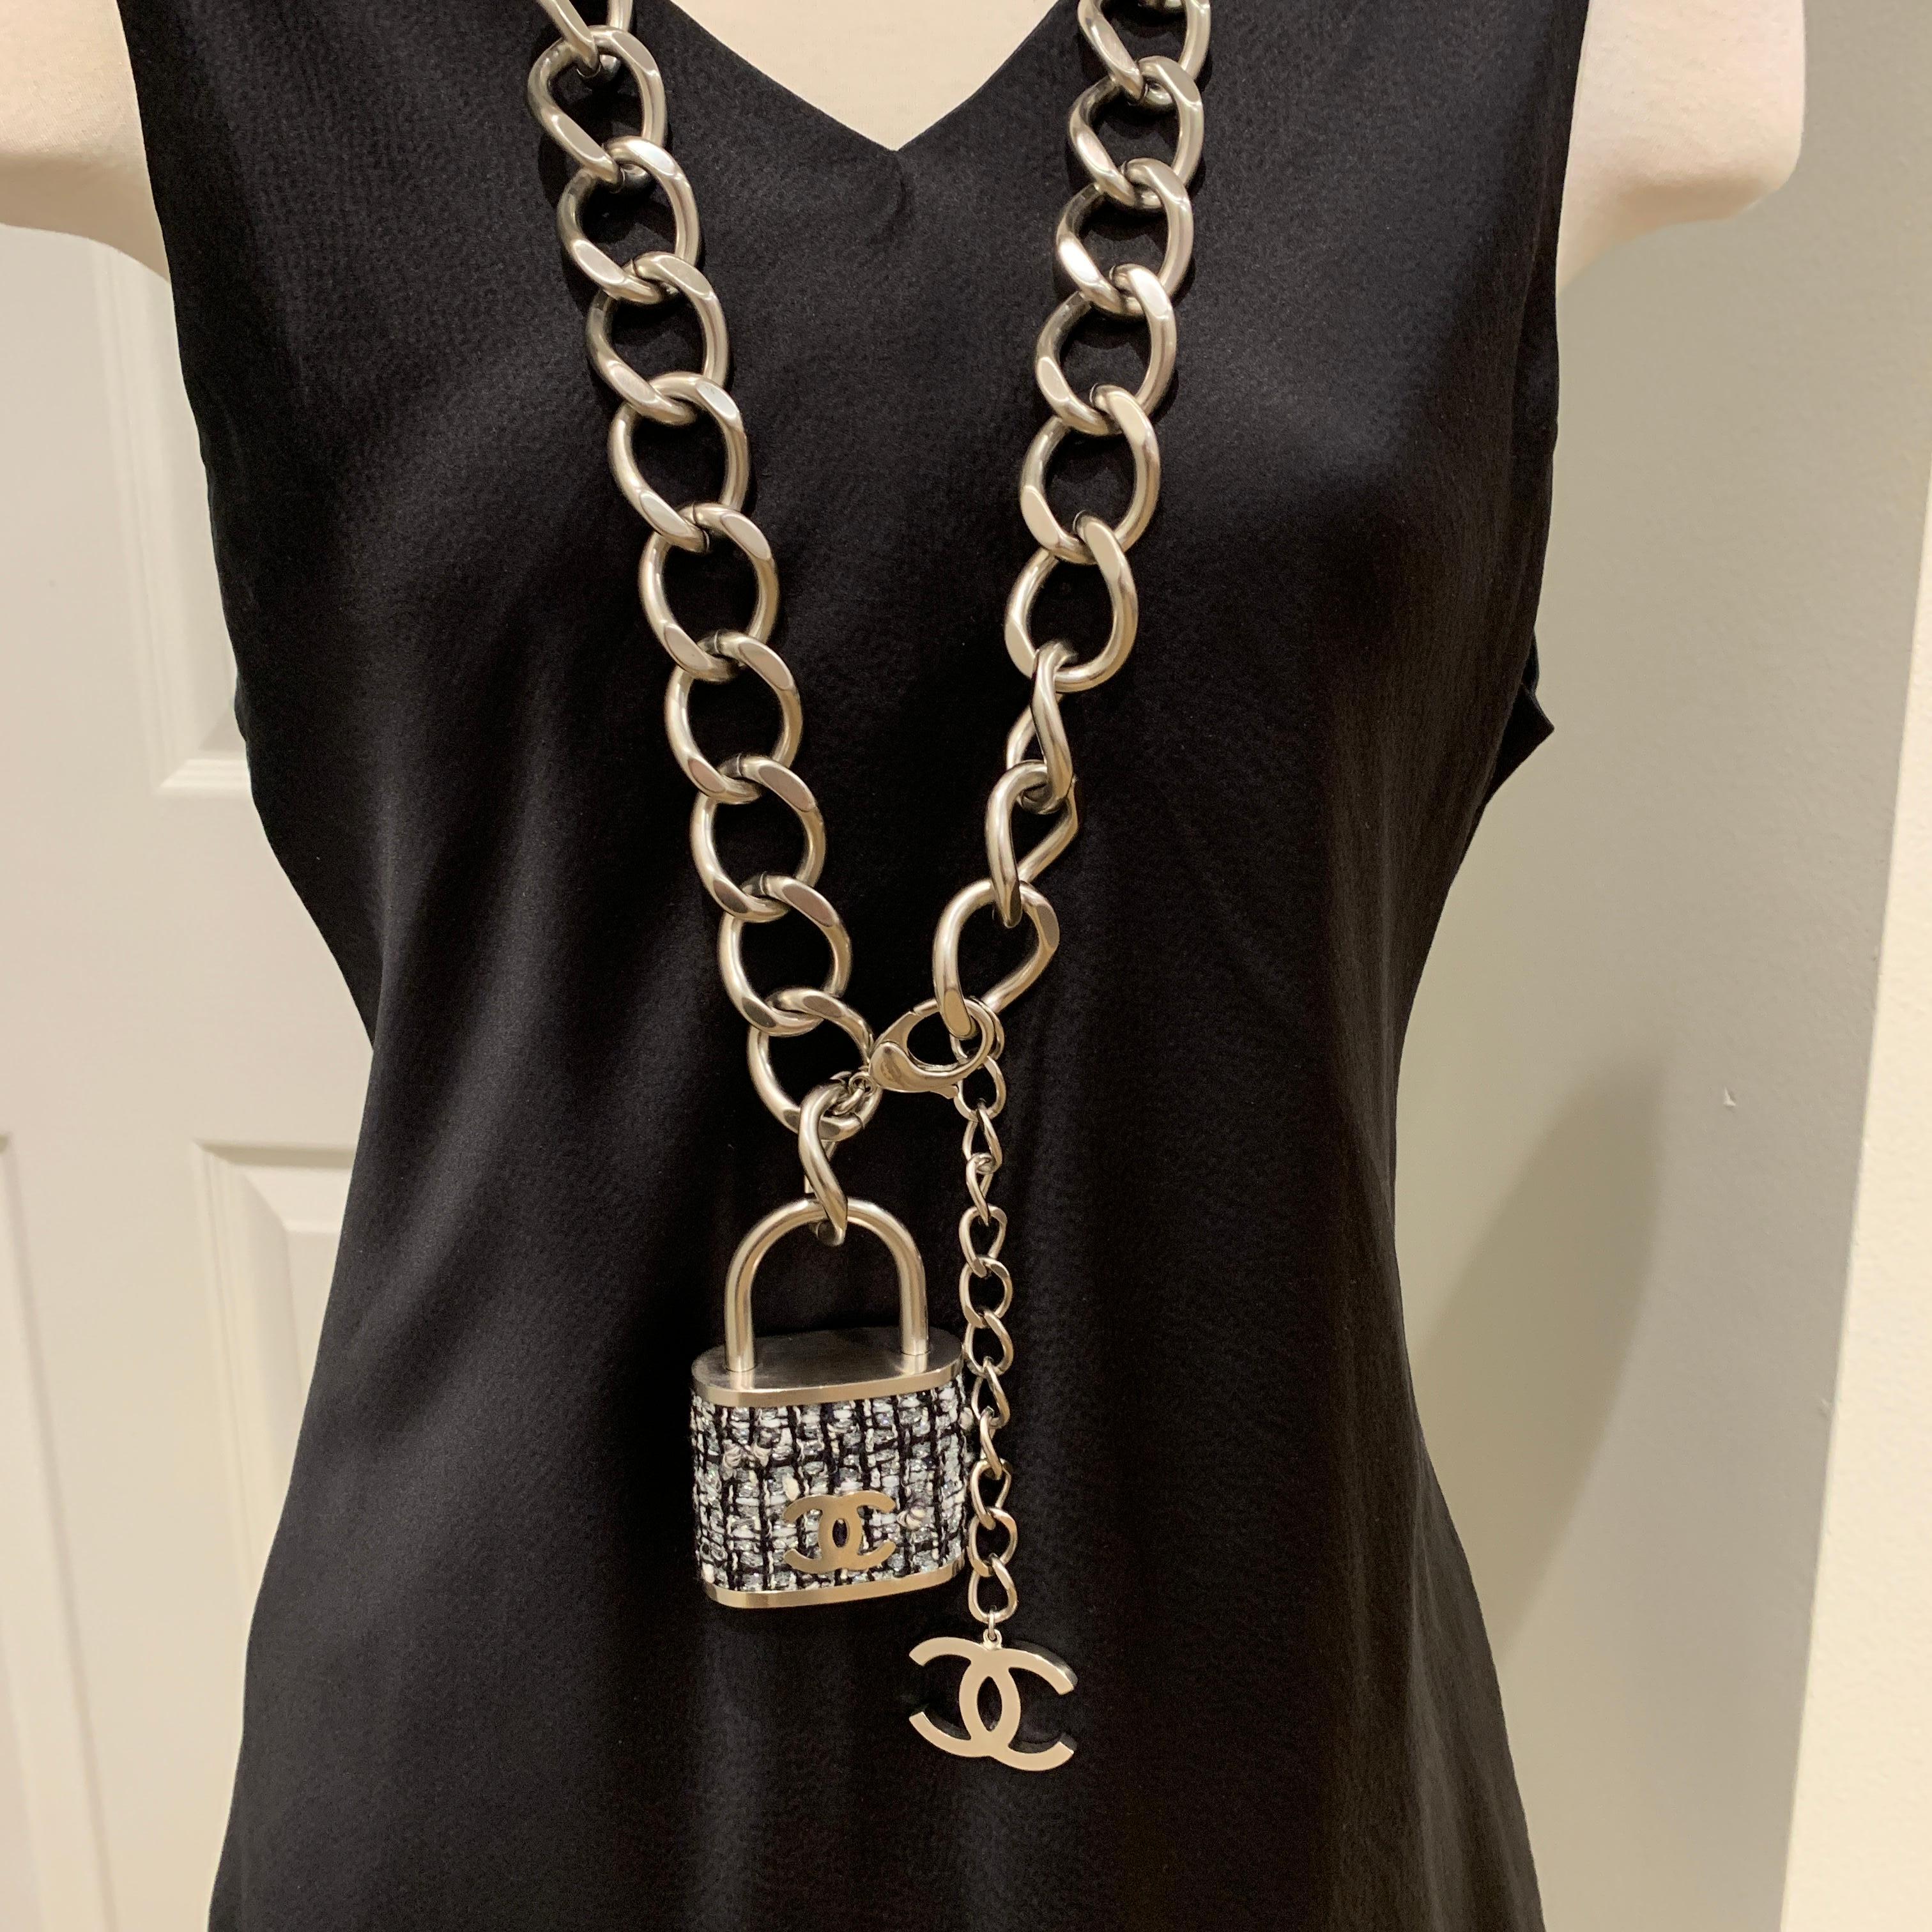 Chanel
Lock in Tweed Fancy Chain Belt
Silver Hardware
Black and white Tweed lock
Lock is oversized and measures approx 2 x 3
The chain is approx 32